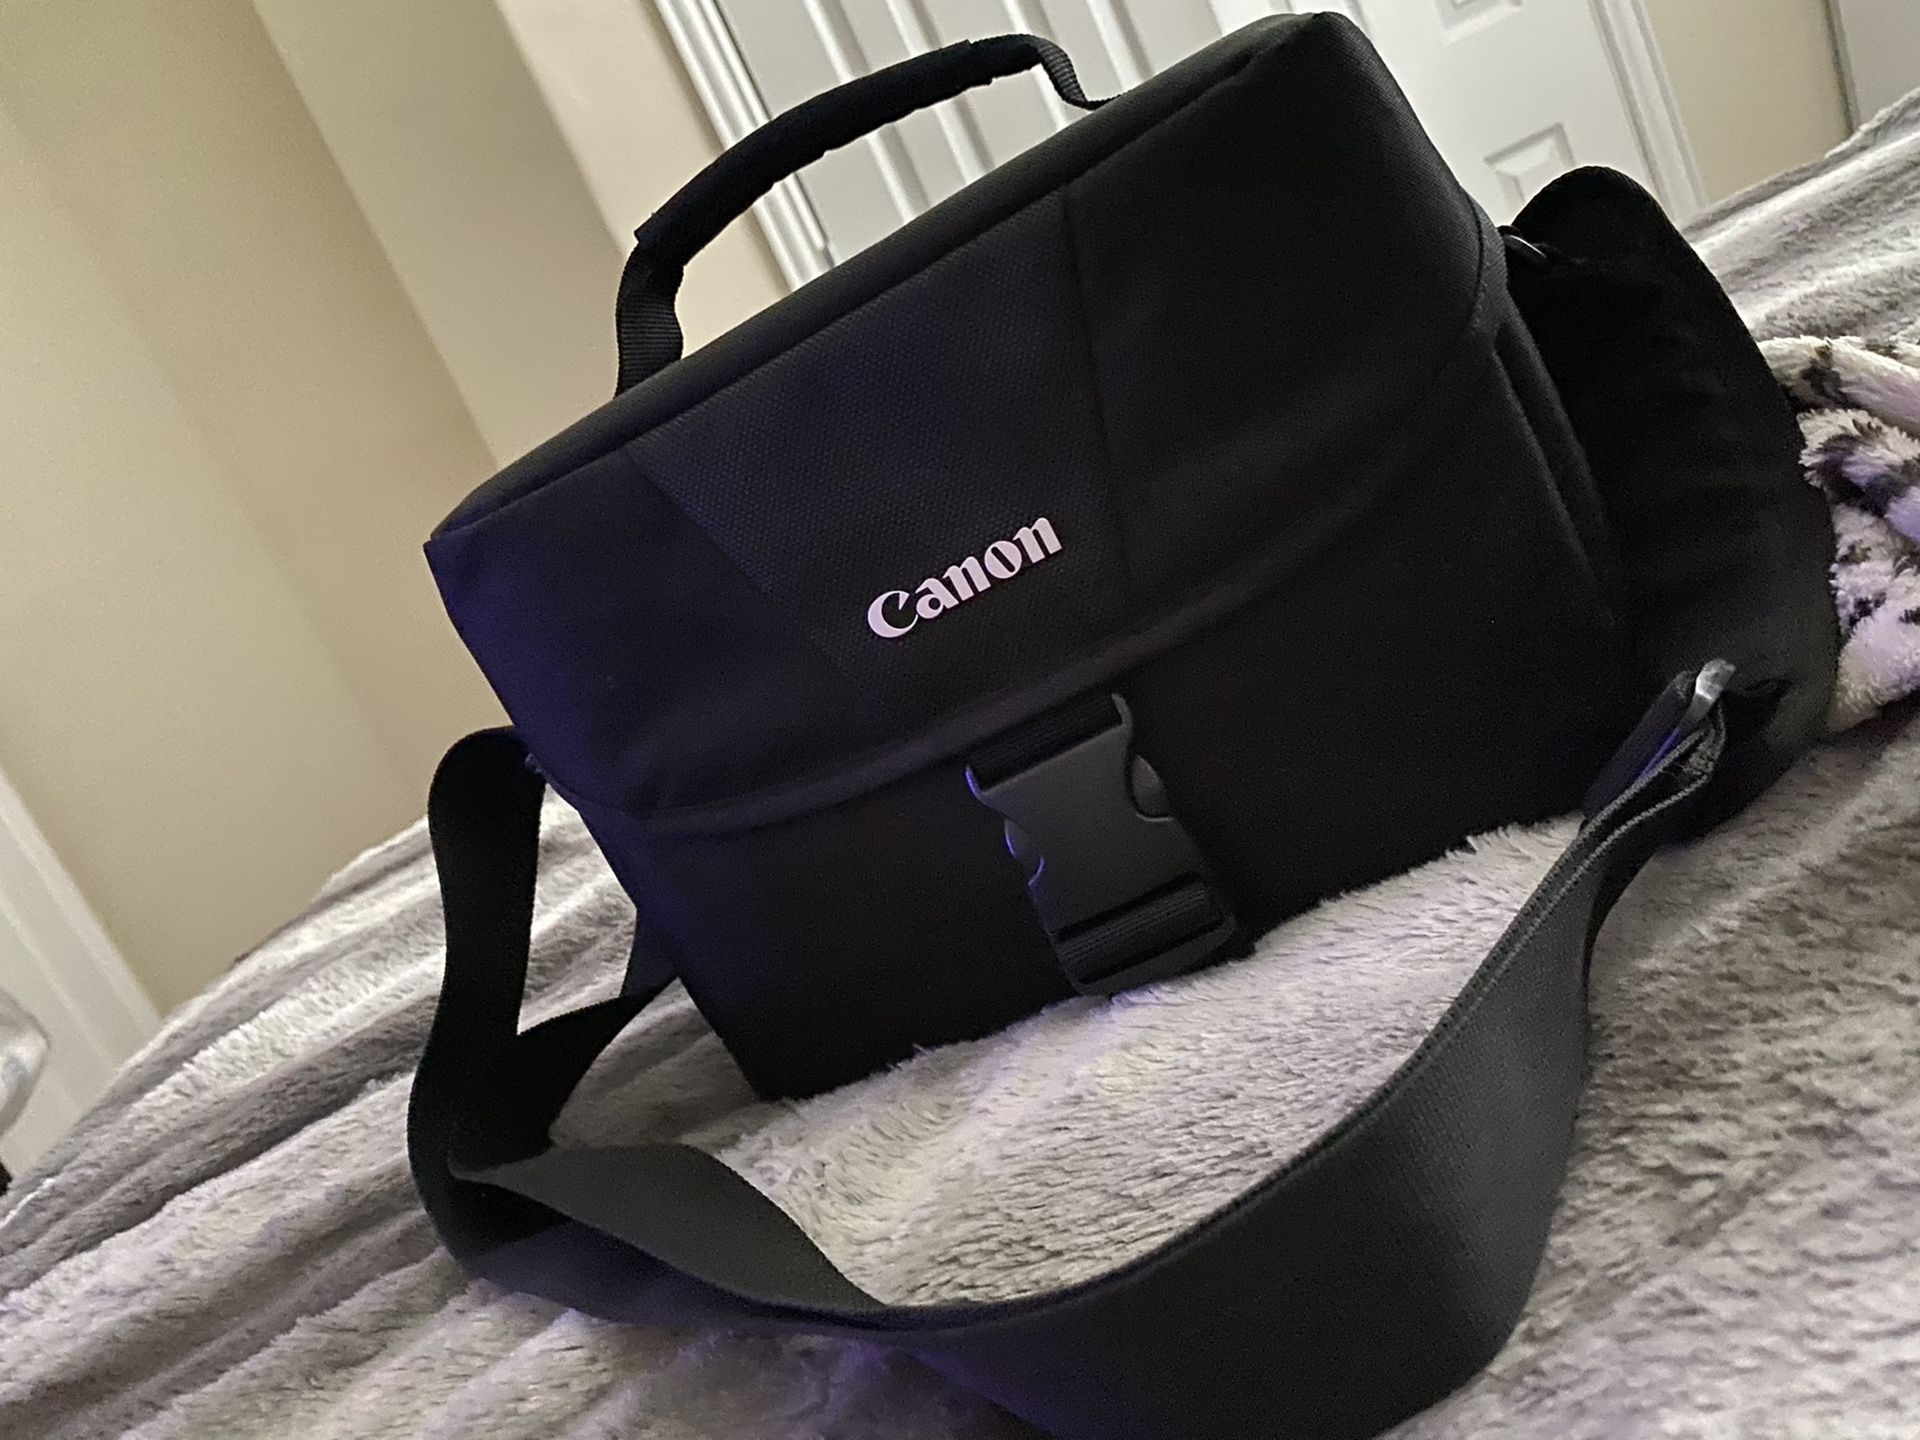 Canon Rebel T7 DSLR with cleaning kit, filters, etc & SanDisk